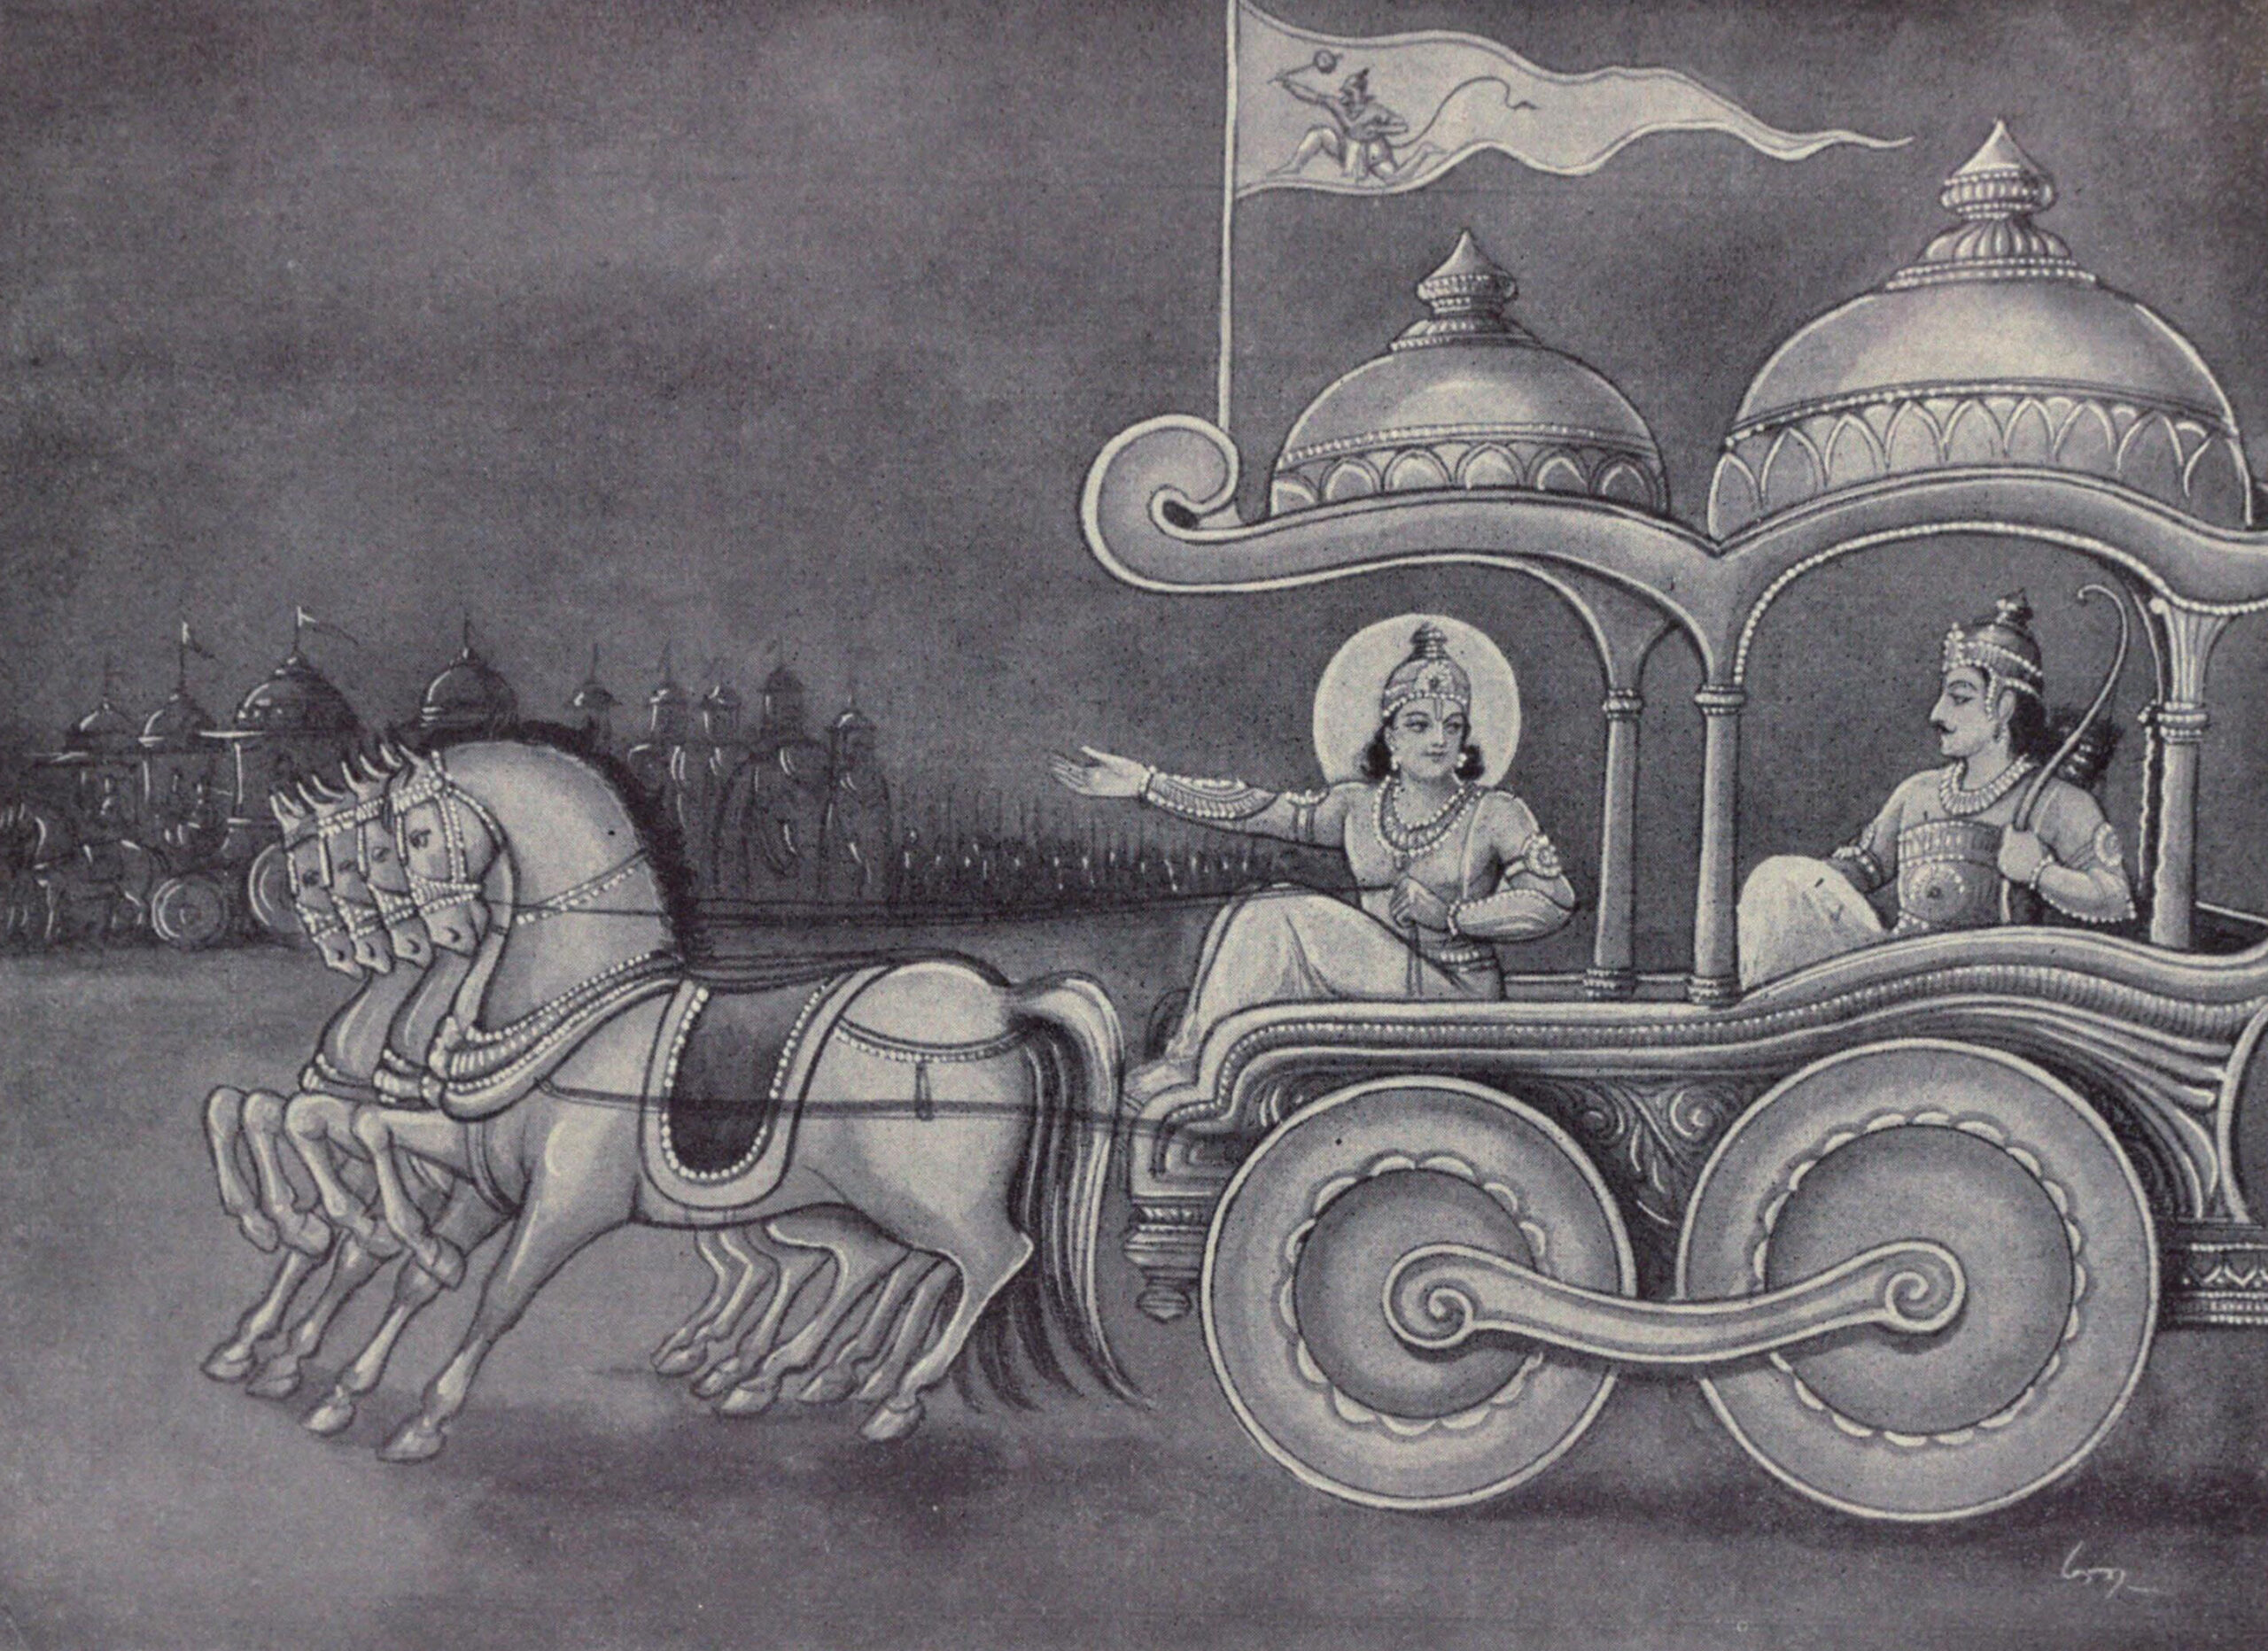 Kṛṣṇa and Arjuna on the chariot